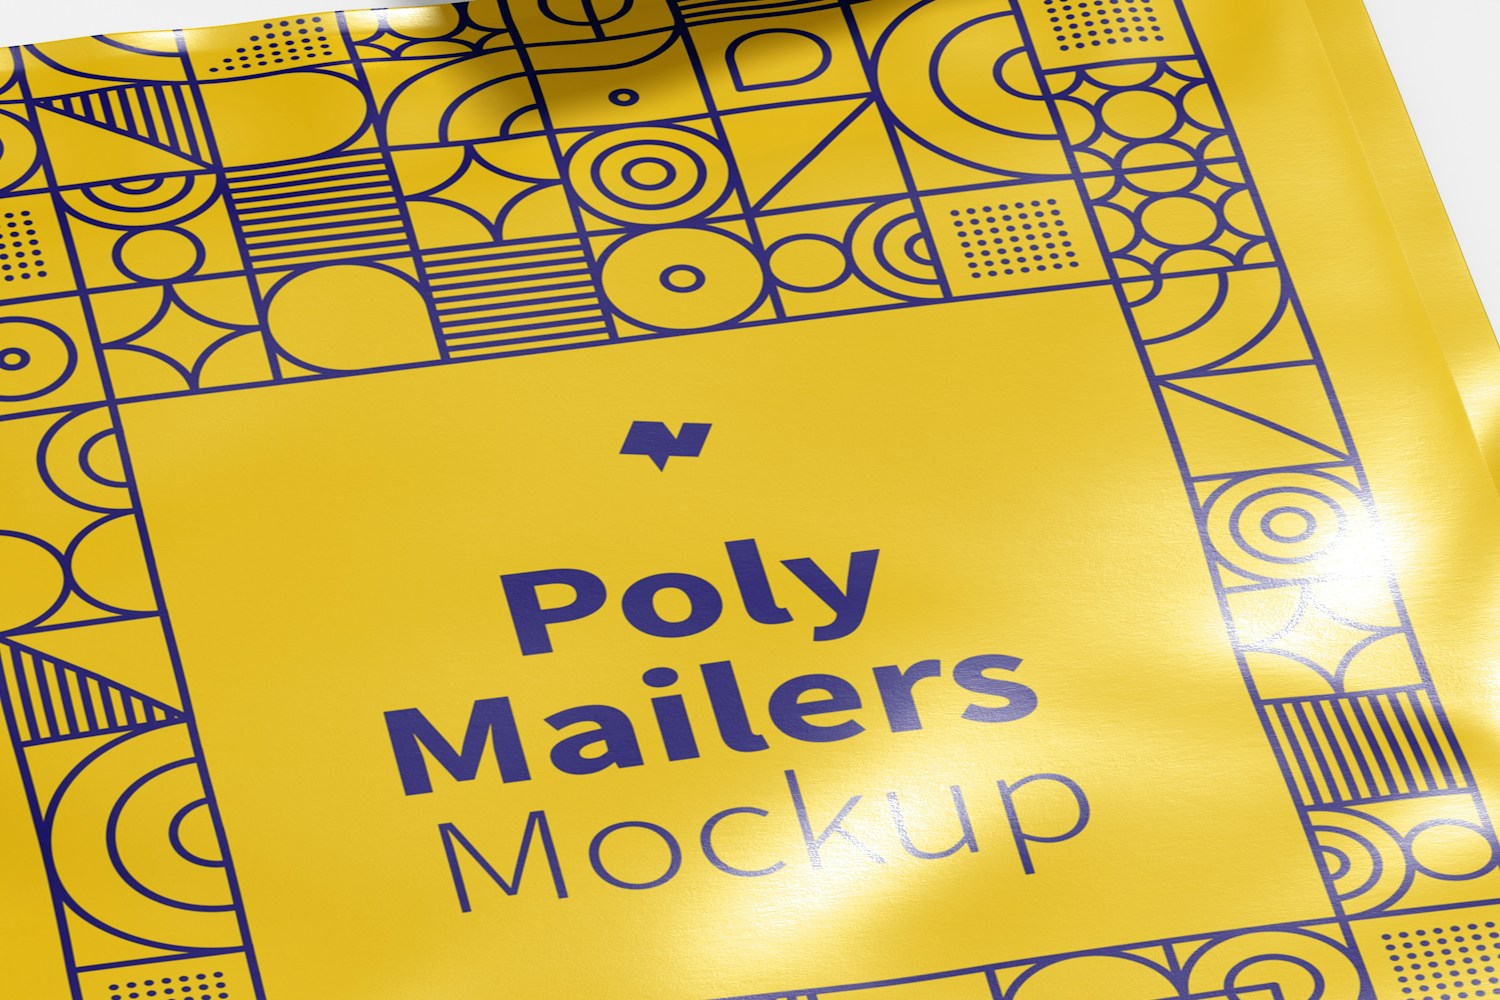 Poly Mailers Mockup, Close Up